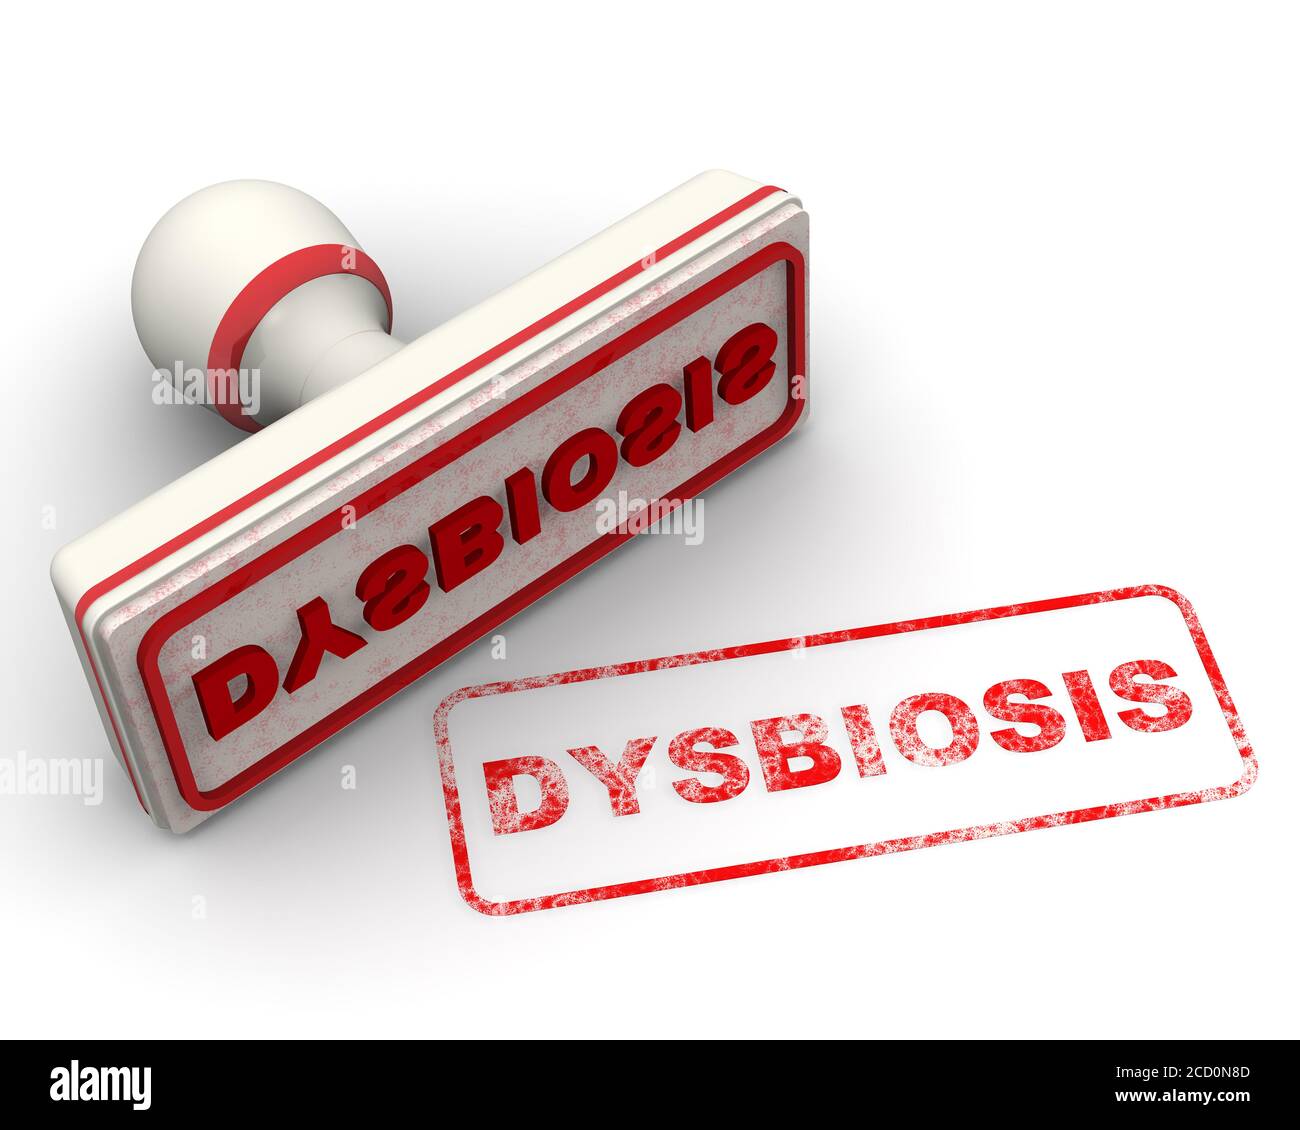 Dysbiosis. The stamp and an imprint. The white seal and red imprint DYSBIOSIS (is a term for a microbial imbalance on or inside the body) Stock Photo